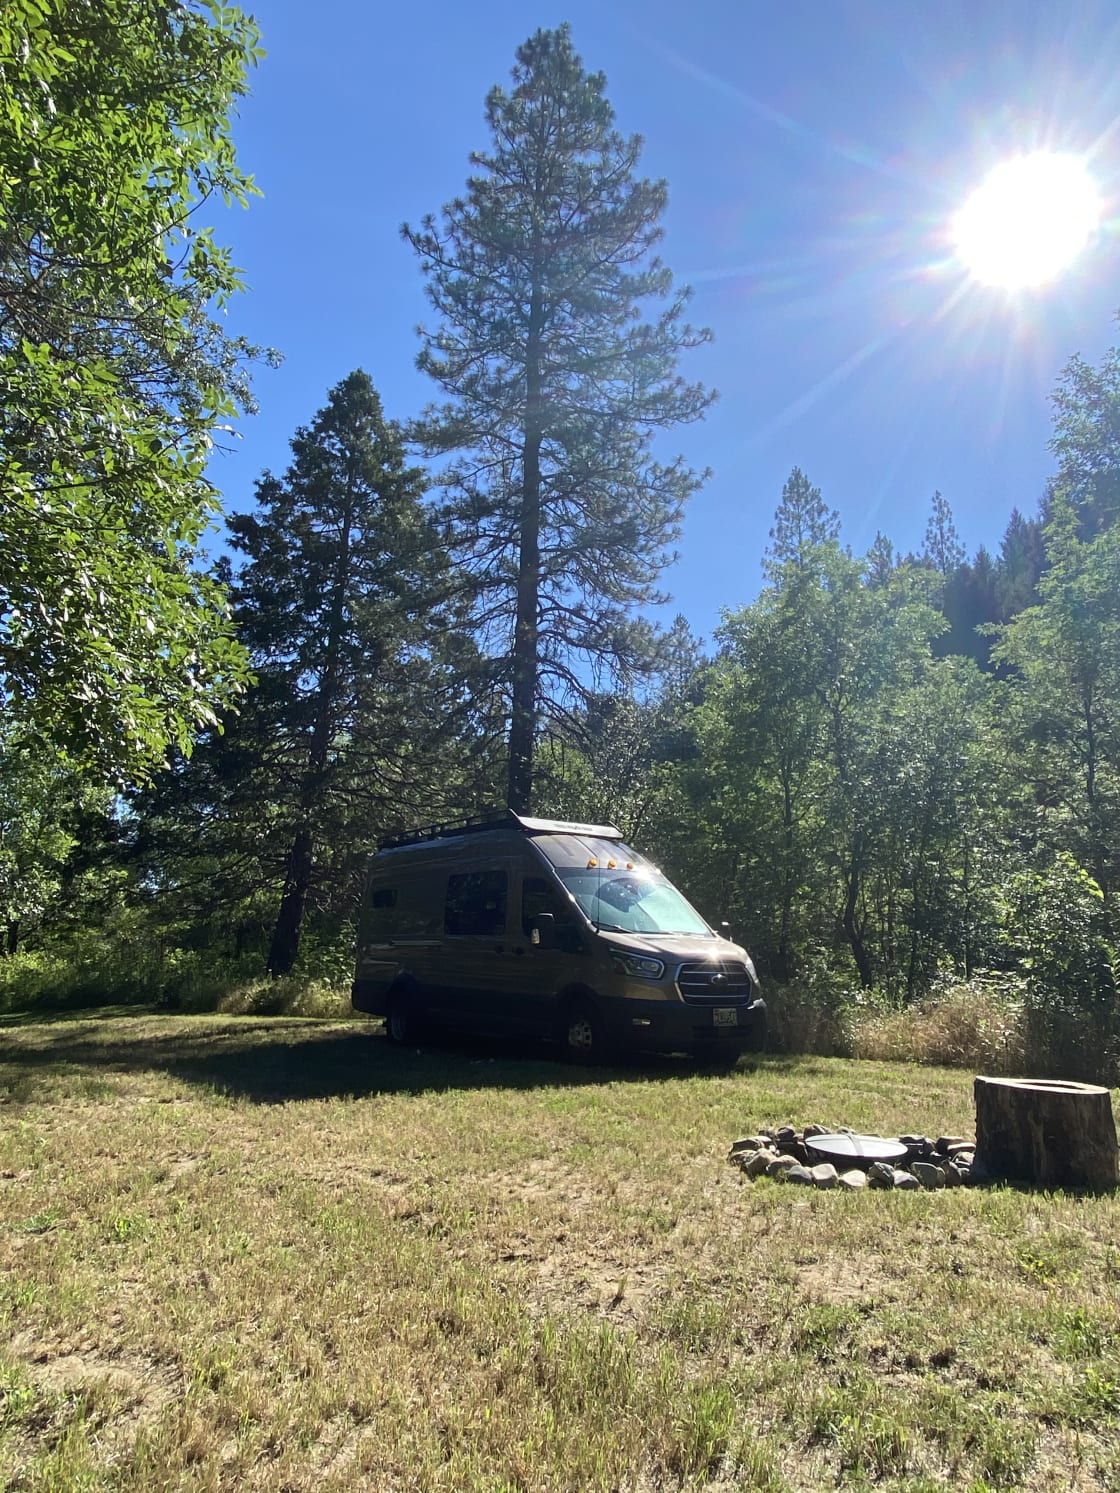 Creekside Campground